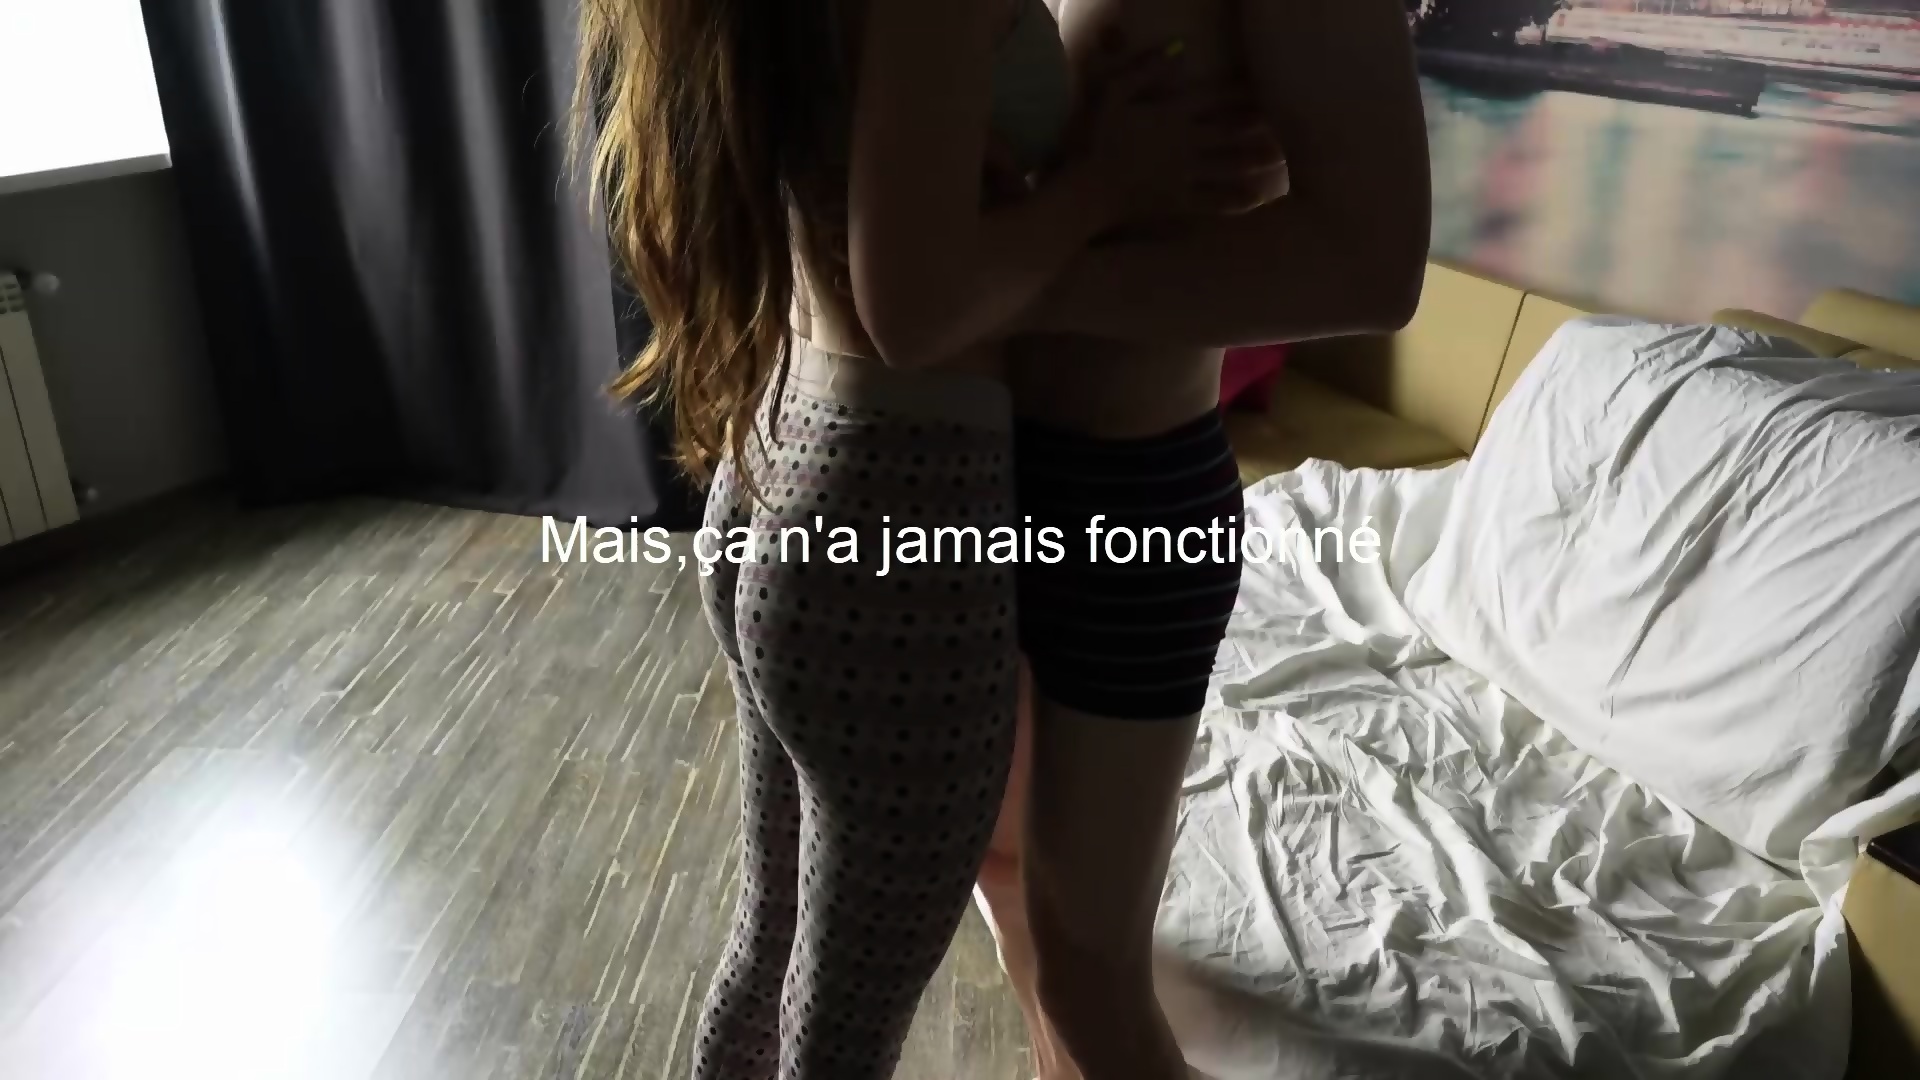 Hot Big Tits French Real Amateur Teen Handjob On Homemade Sextape pic picture